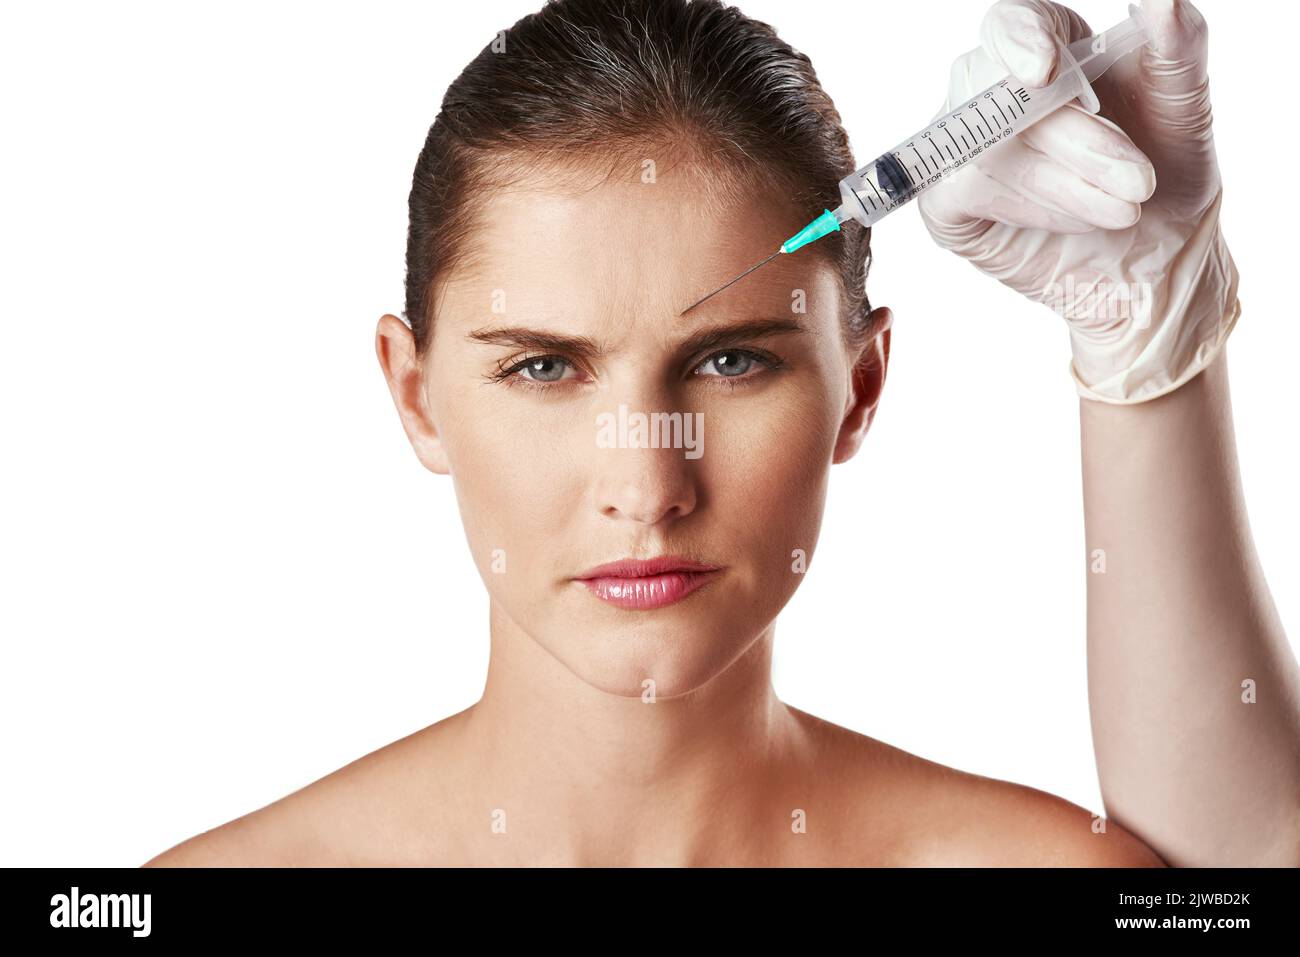 She wont let age win without a fight. Studio shot of an attractive young woman getting an injection for cosmetic purposes. Stock Photo